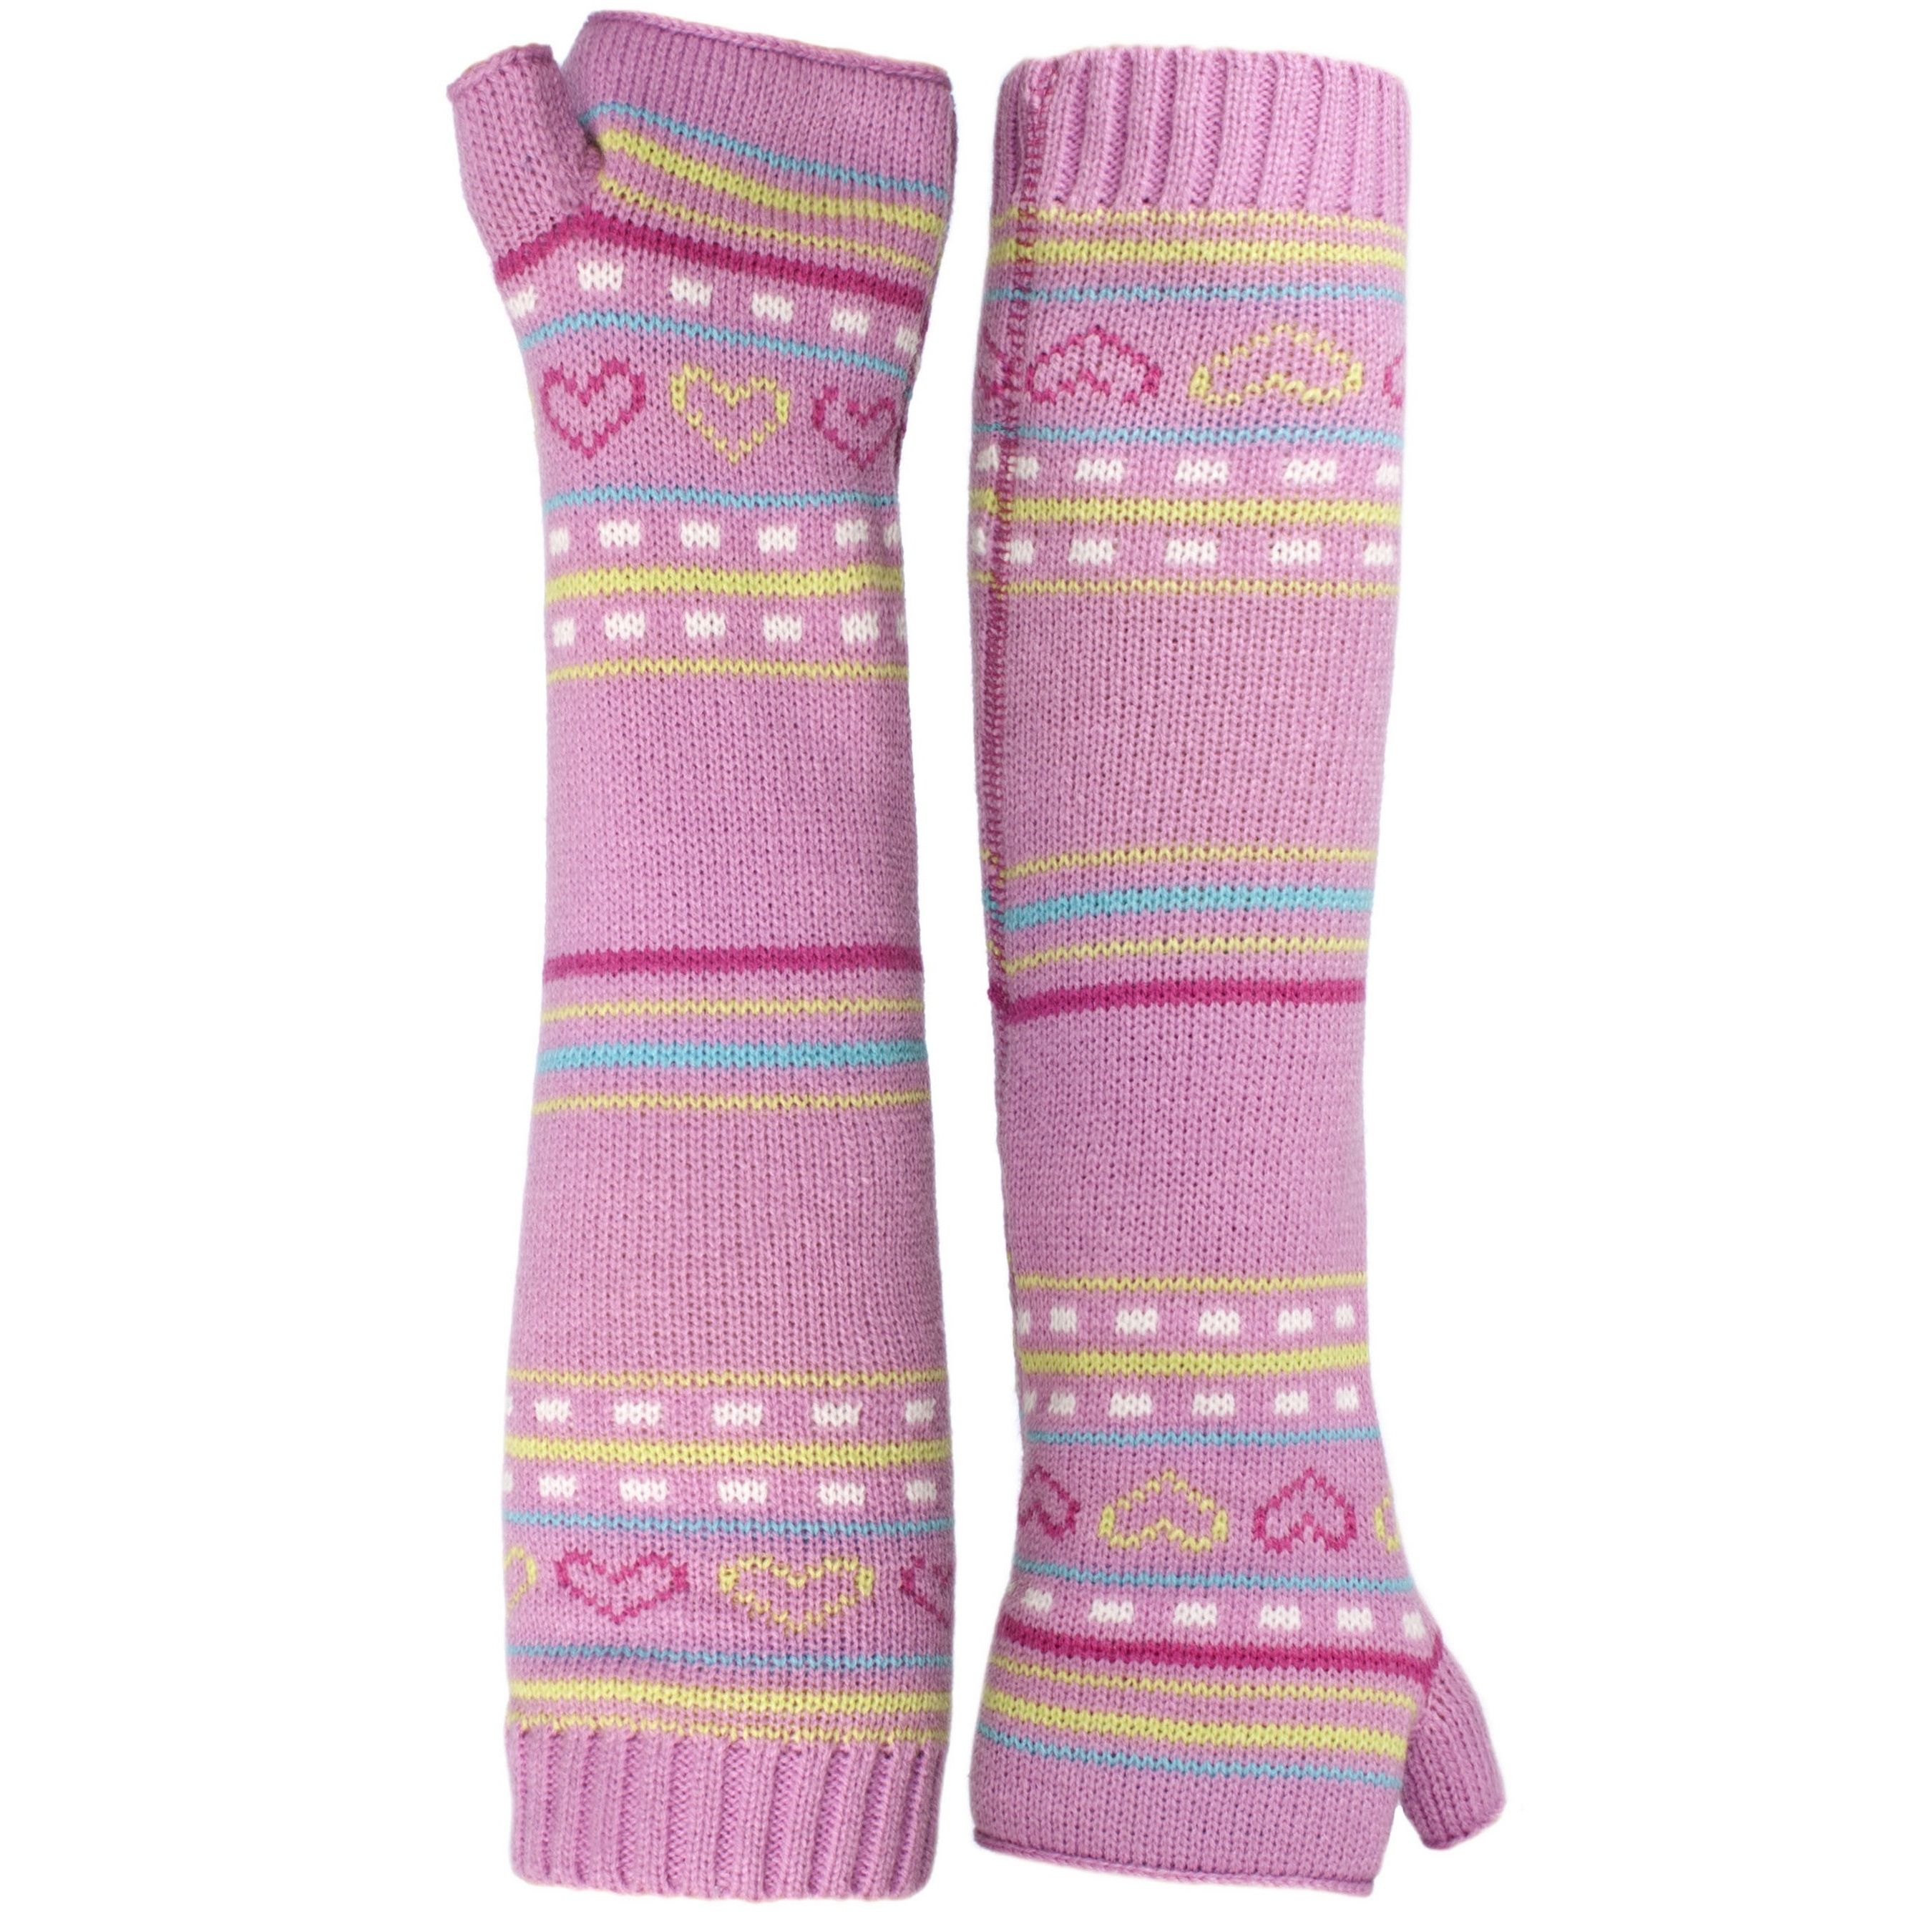 Girls arm warmers. Perfect for wearing in the cold weather. Knitted. Woven label. Slip on. Ribbed cuff. Fabric: 100% acrylic.